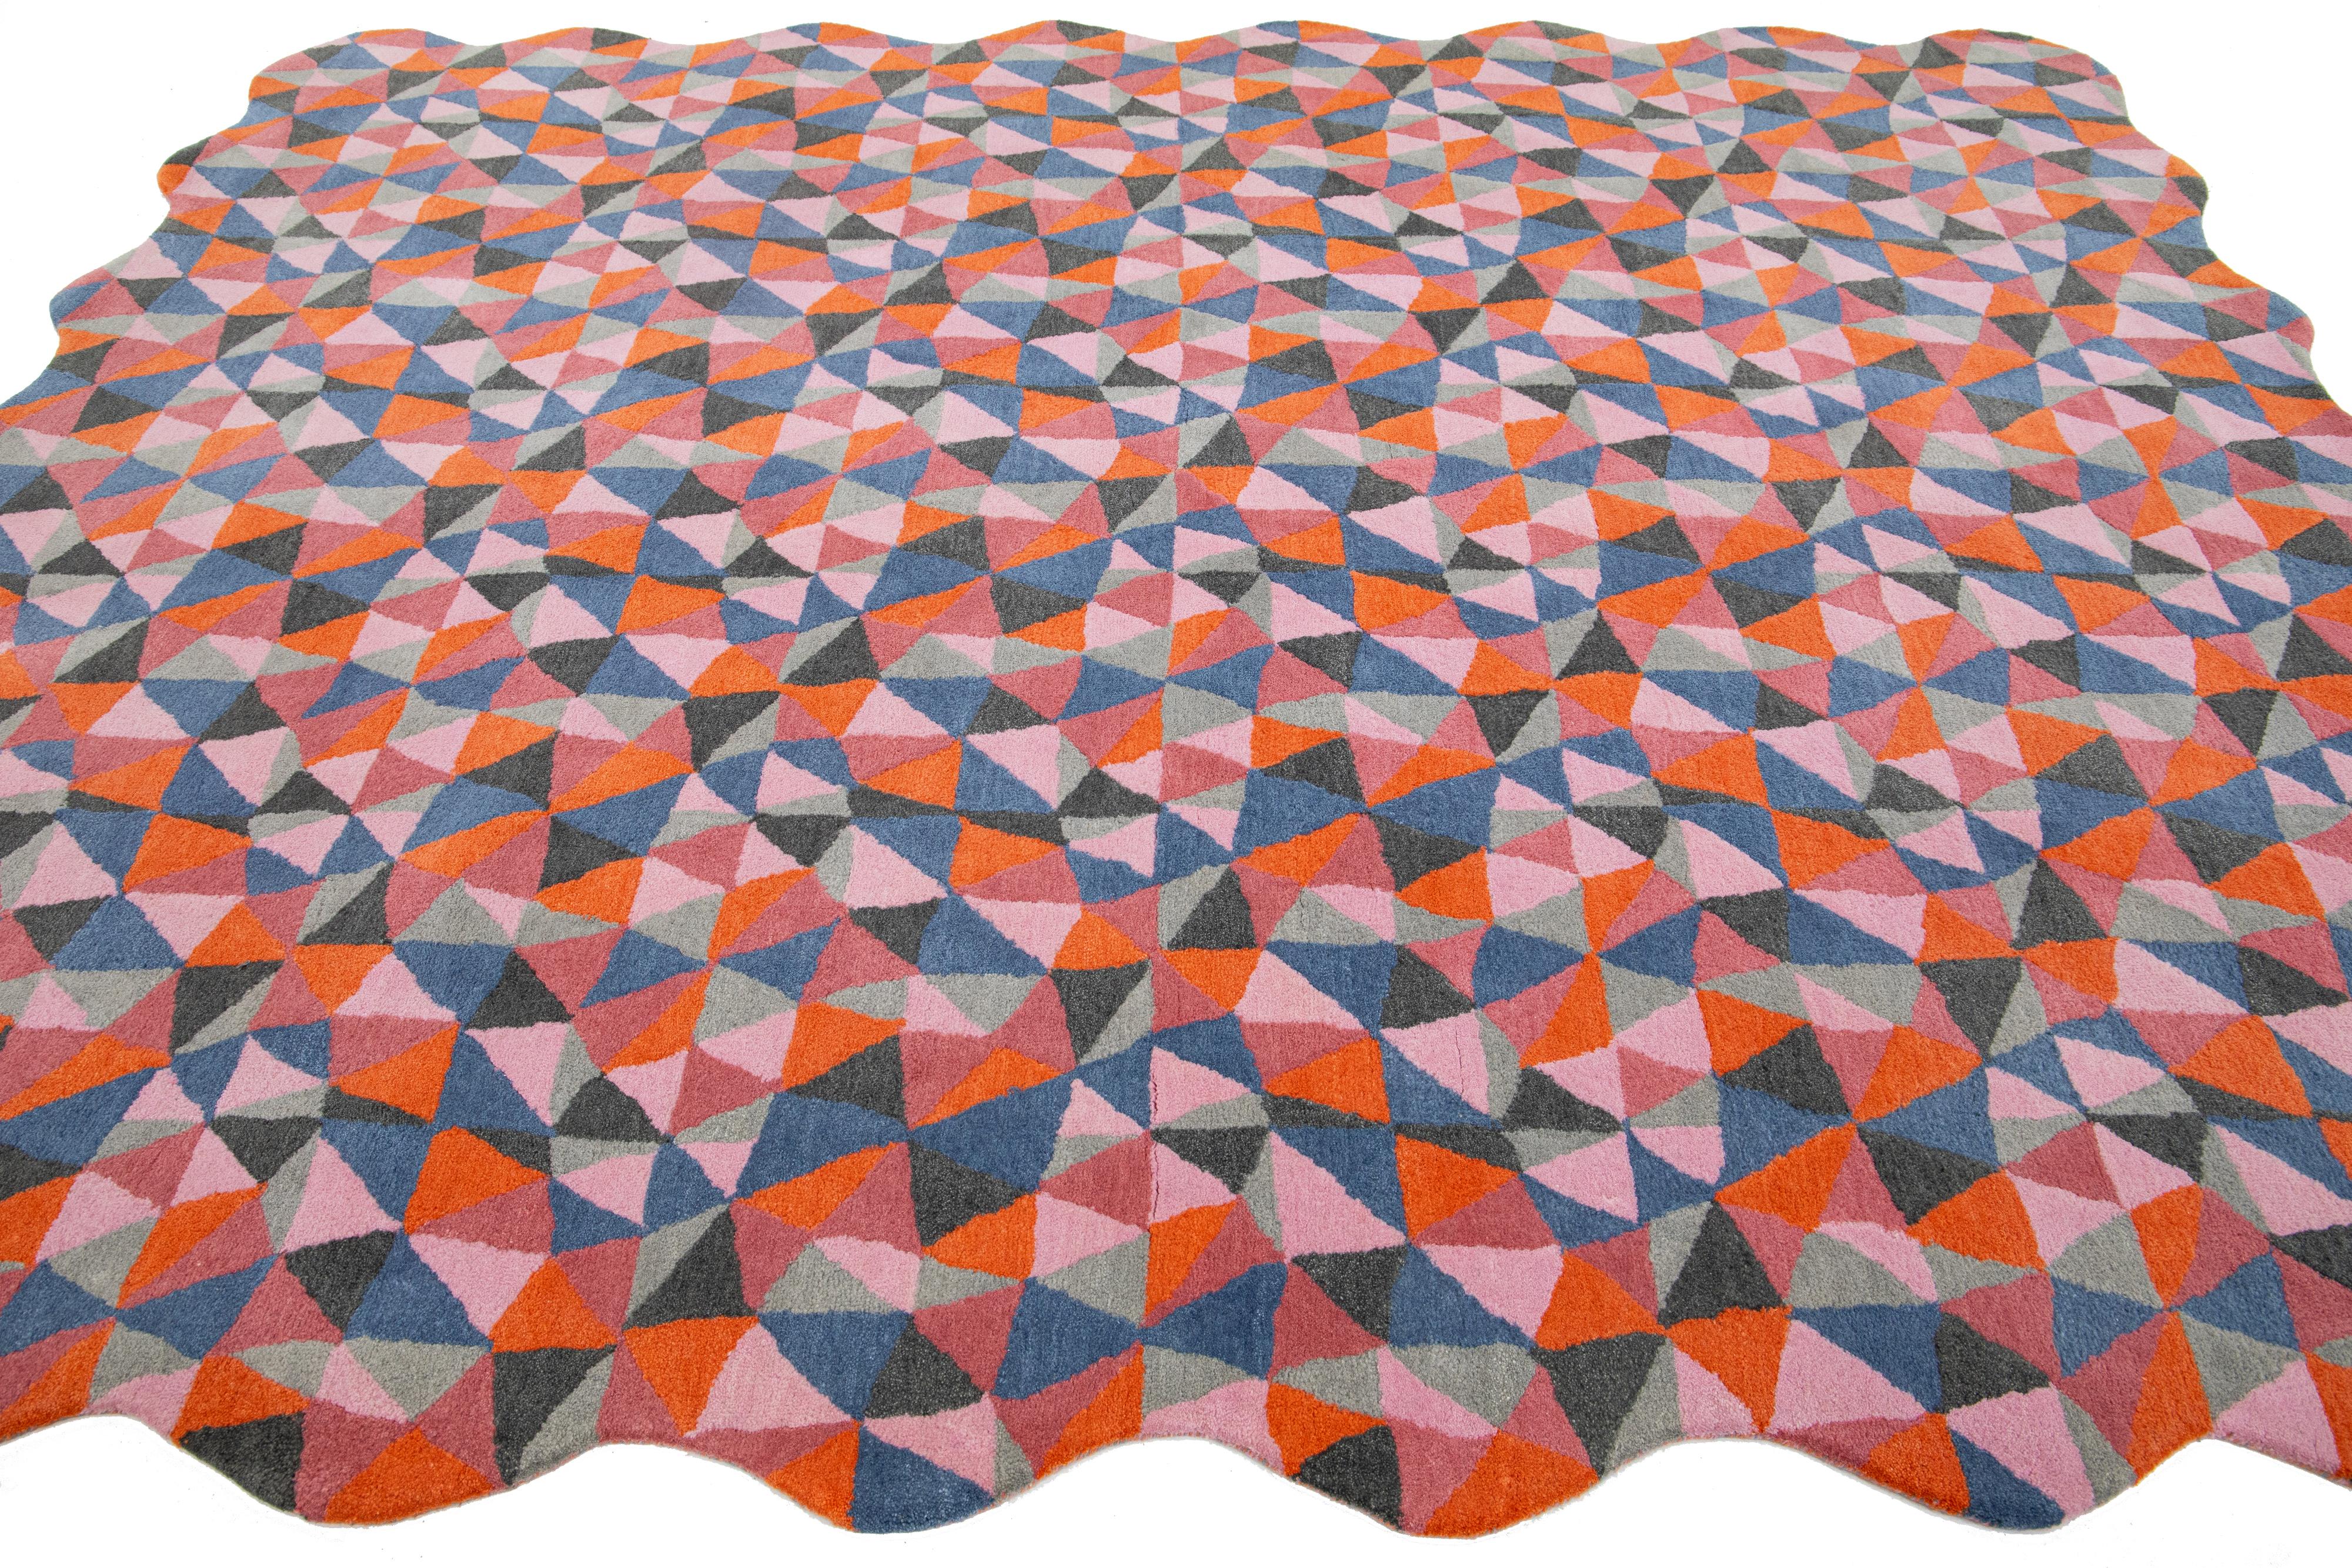 Multicolor Hand-Tufted Modern Wool Rug with Mosaico Pattern By Apadana In New Condition For Sale In Norwalk, CT